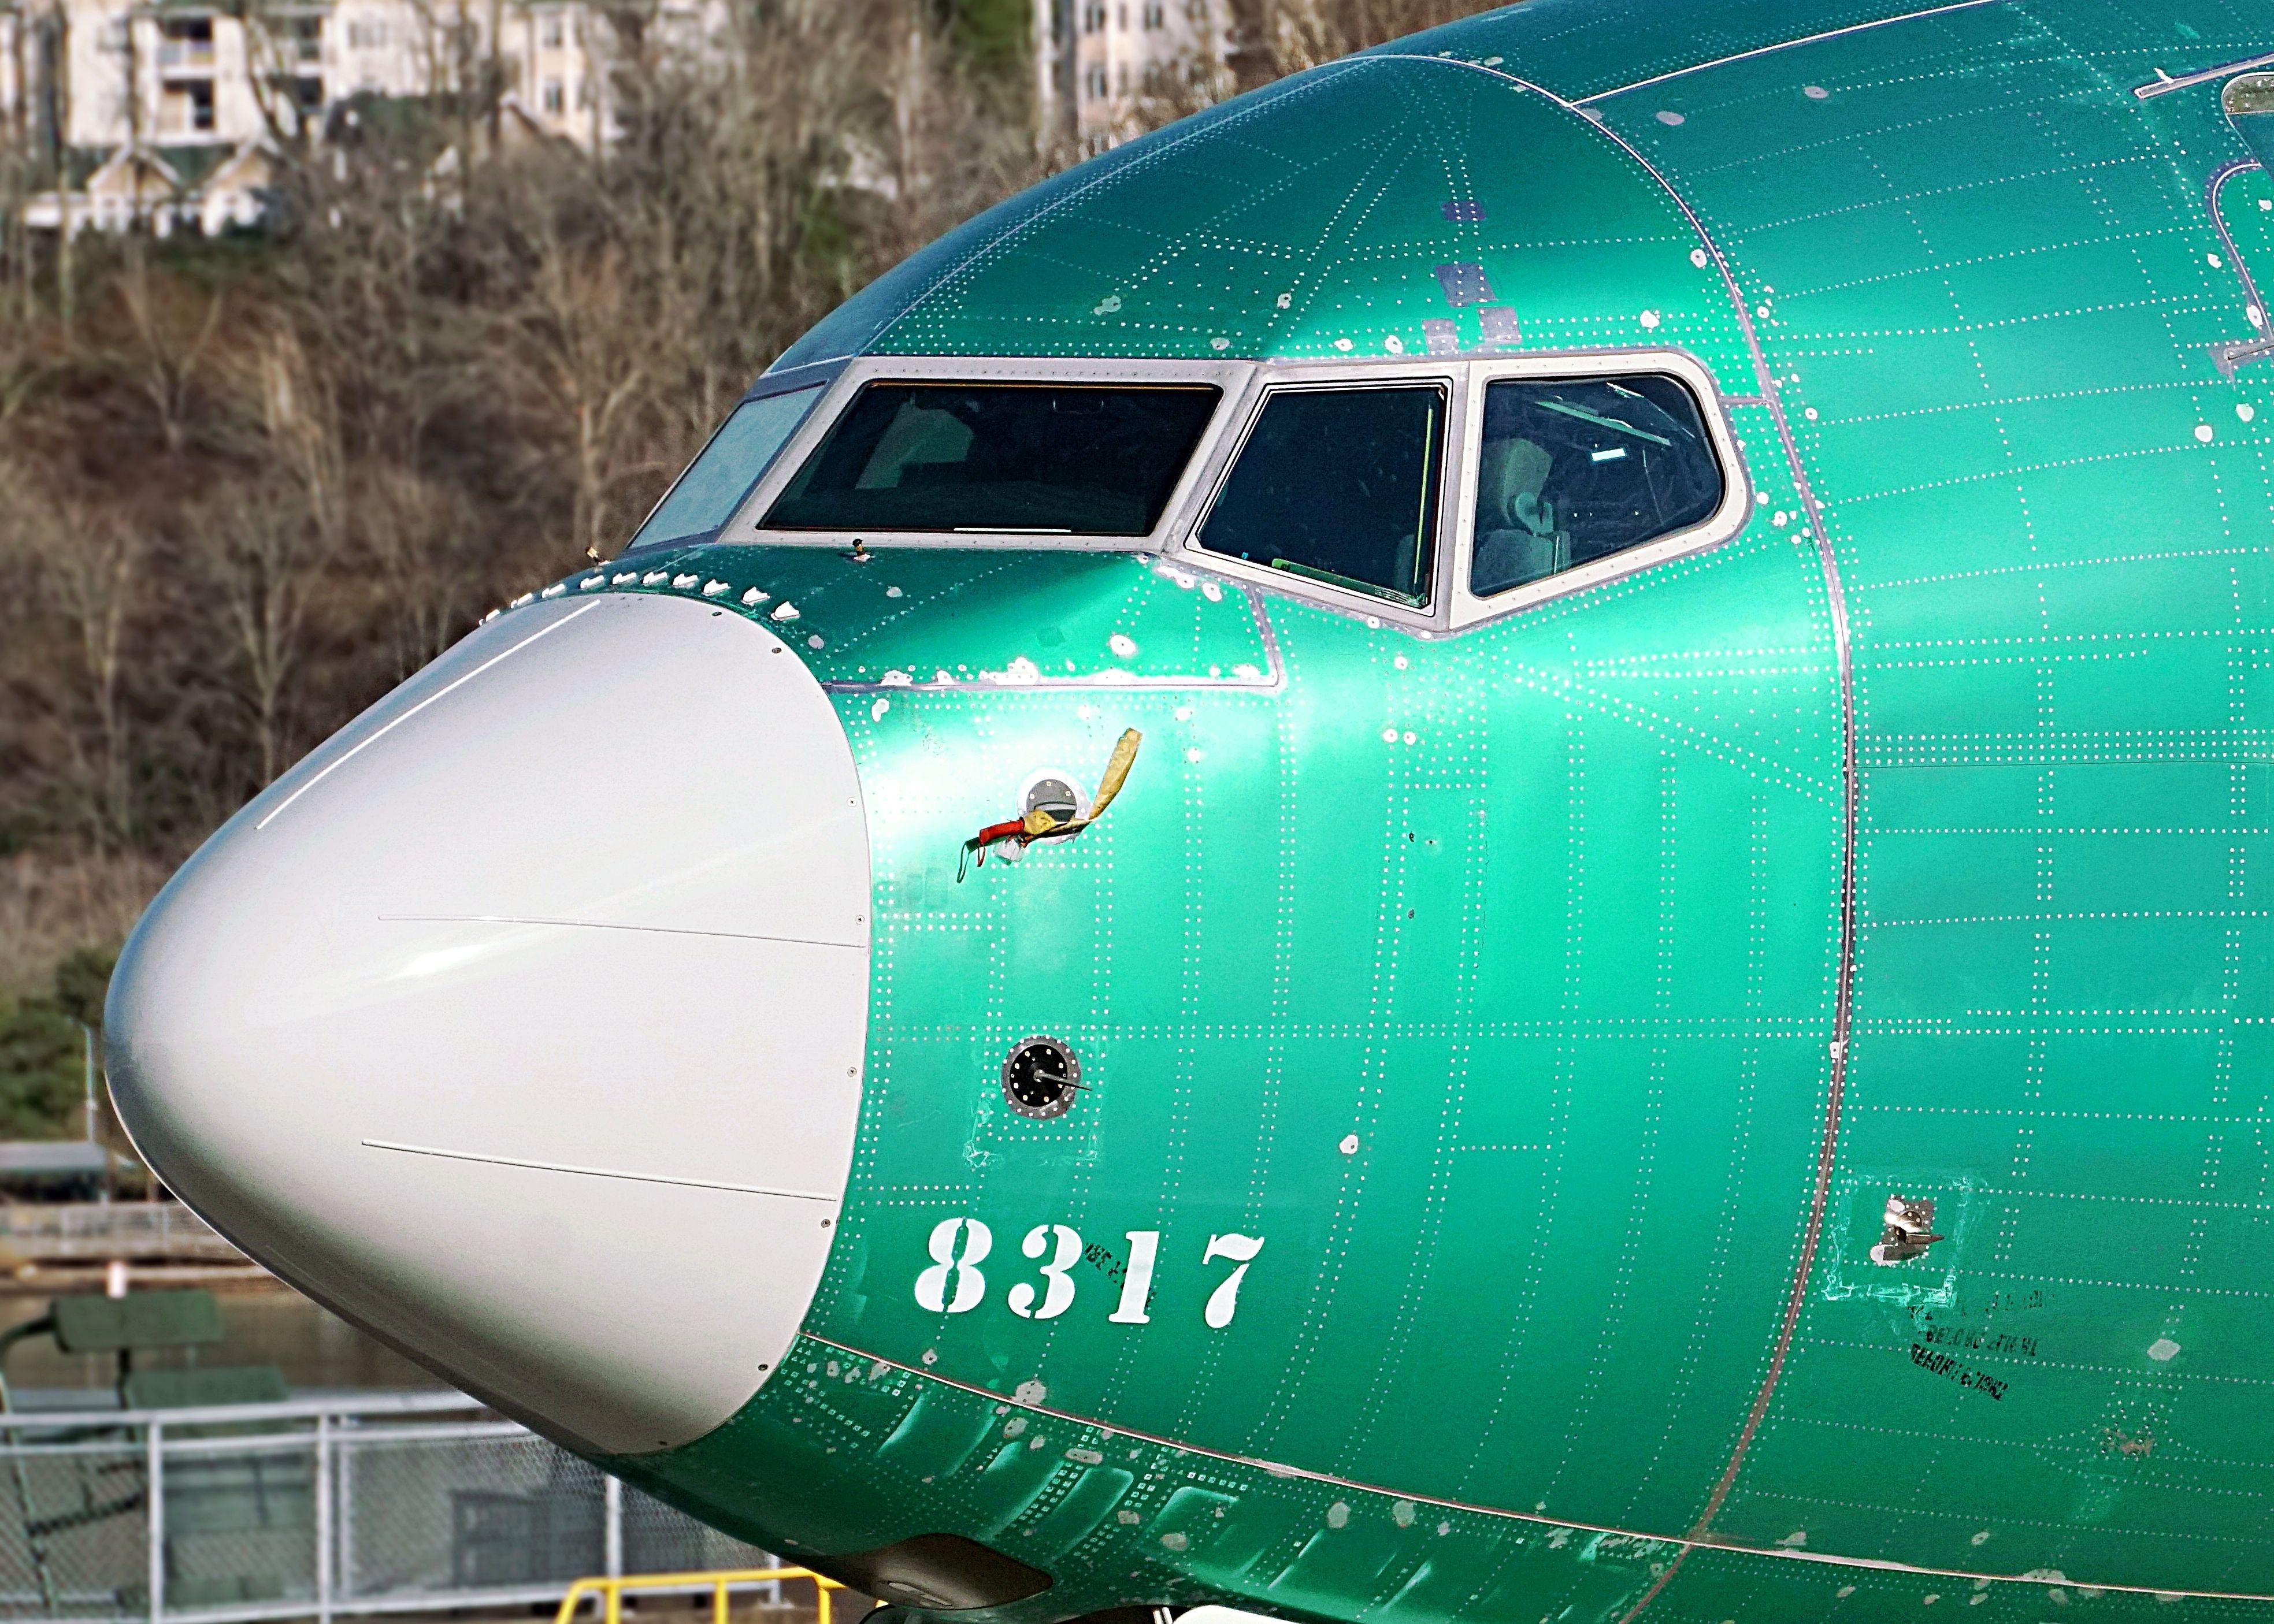 Renton, Washington USA - Jan 30th, 2023: A recently-built Boeing 737 MAX sits outside the Boeing factory ahead of painting and delivery